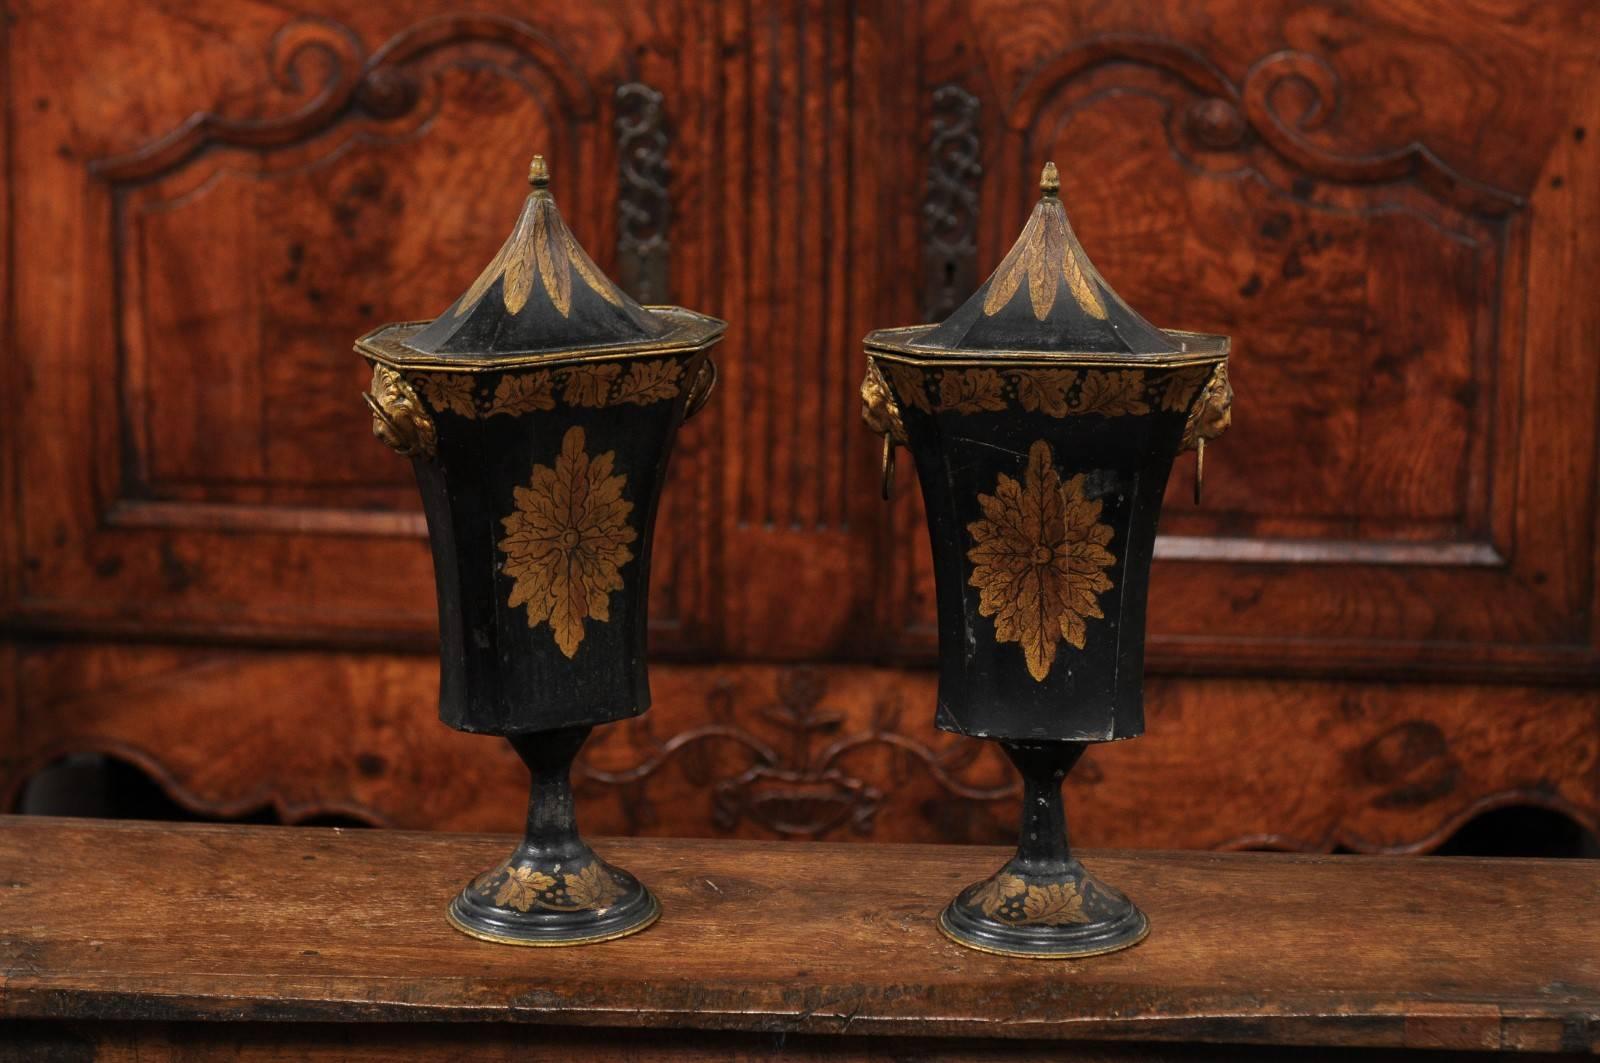 A pair of French Napoleon III period painted and gilded tôle urns with lids from the mid-19th century. Each of this pair of French urns features a pyramidal lid, adorned with gilded foliage that seems to be extending from the upper finial. The body,